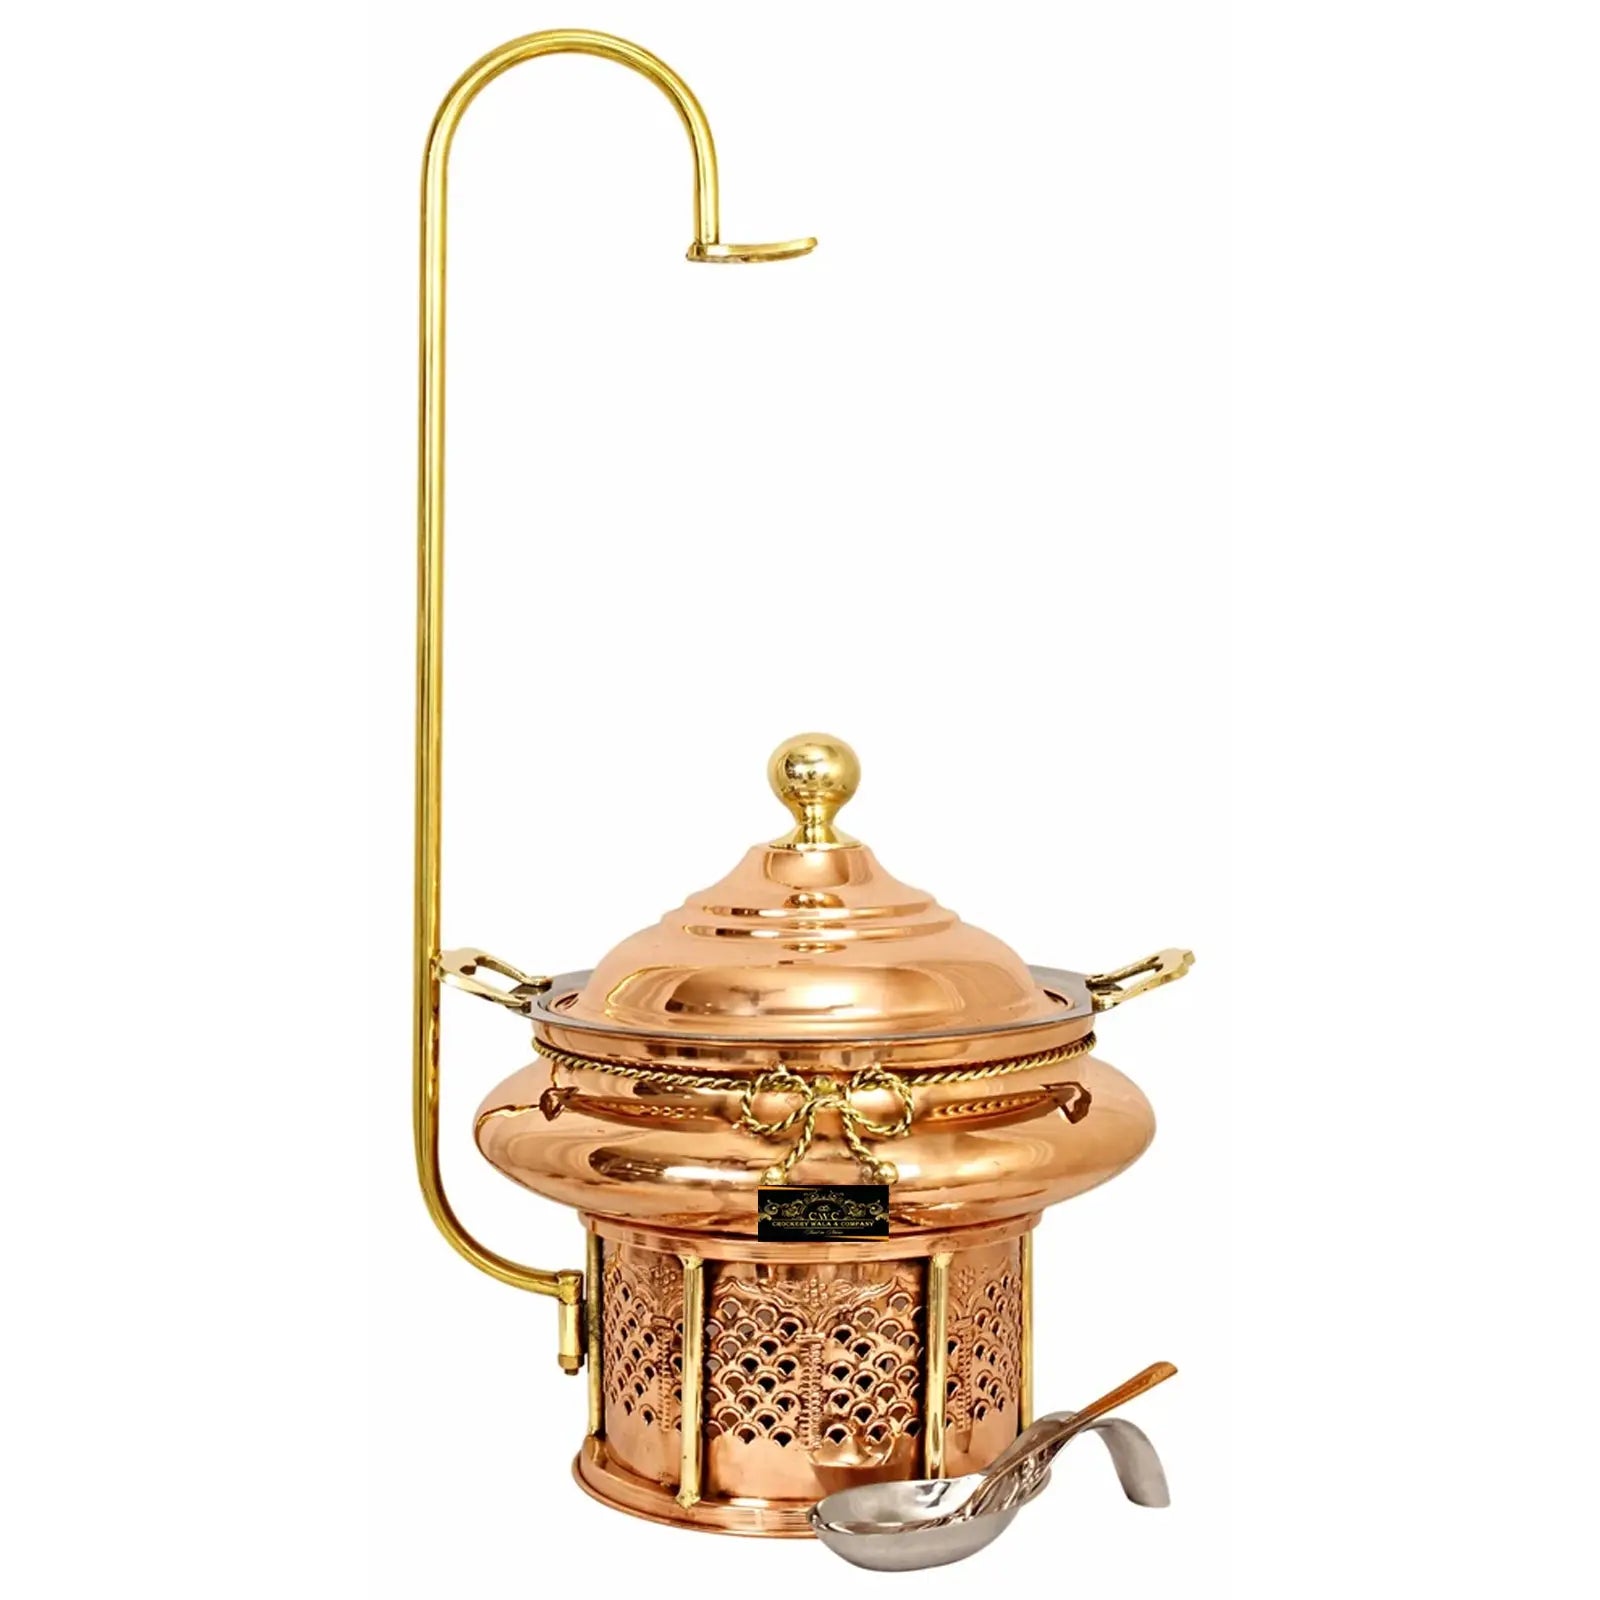 Crockery Wala And Company Copper Steel Chaffing Dish With Sigdi Stand Plain Solid Design With Brass Handles 4 Liters - CROCKERY WALA AND COMPANY 